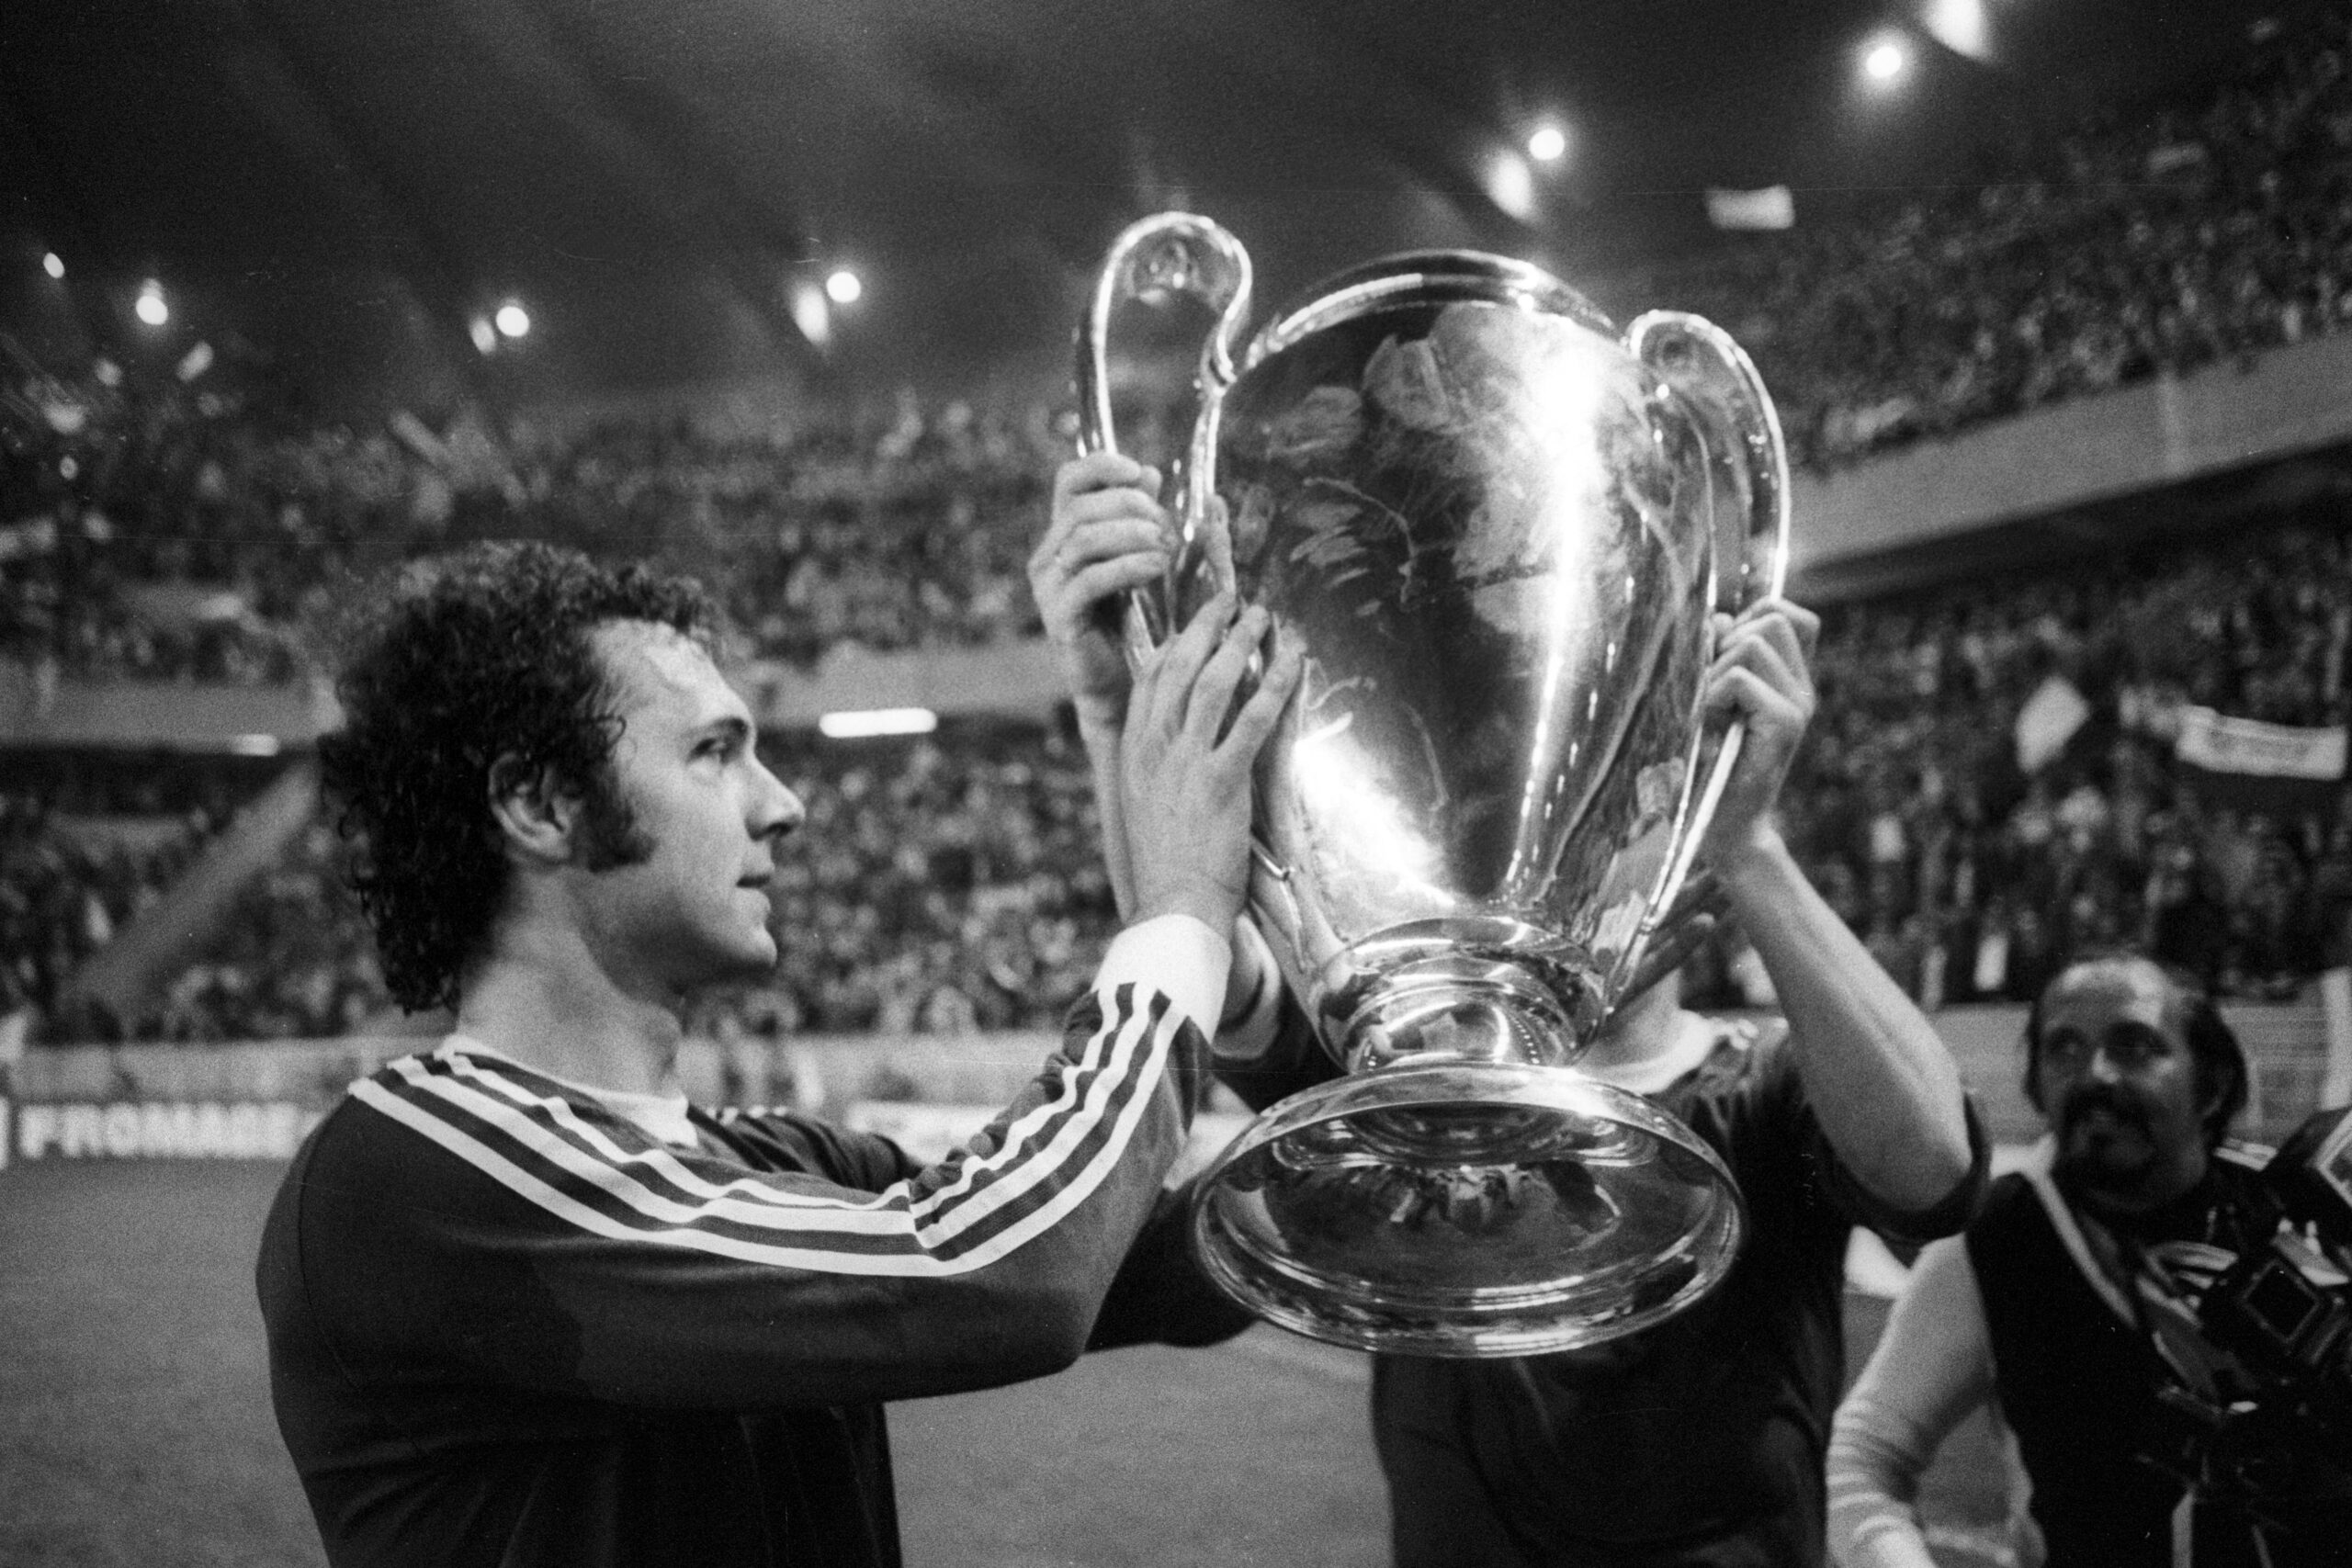 Franz Beckenbeaur being presented with the Uefa Champions League trophy